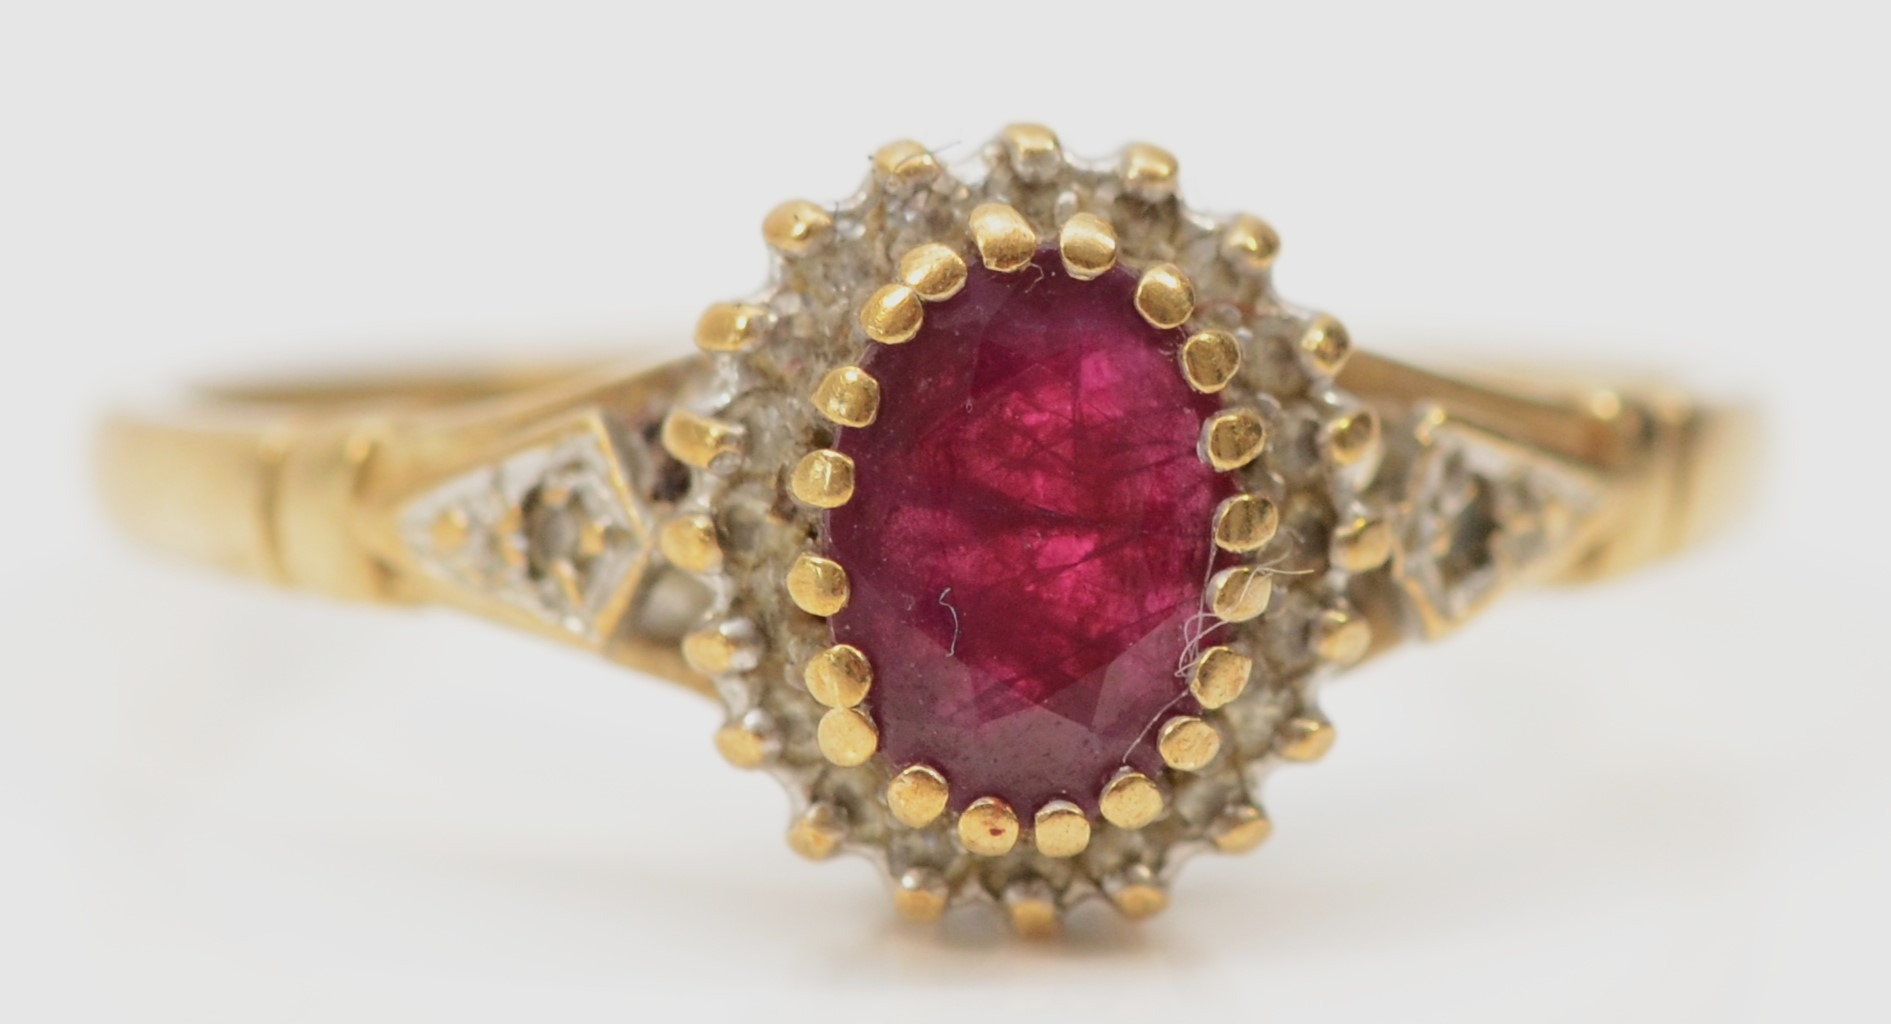 A 9ct gold ruby and diamond cluster ring, S, 2.4gm